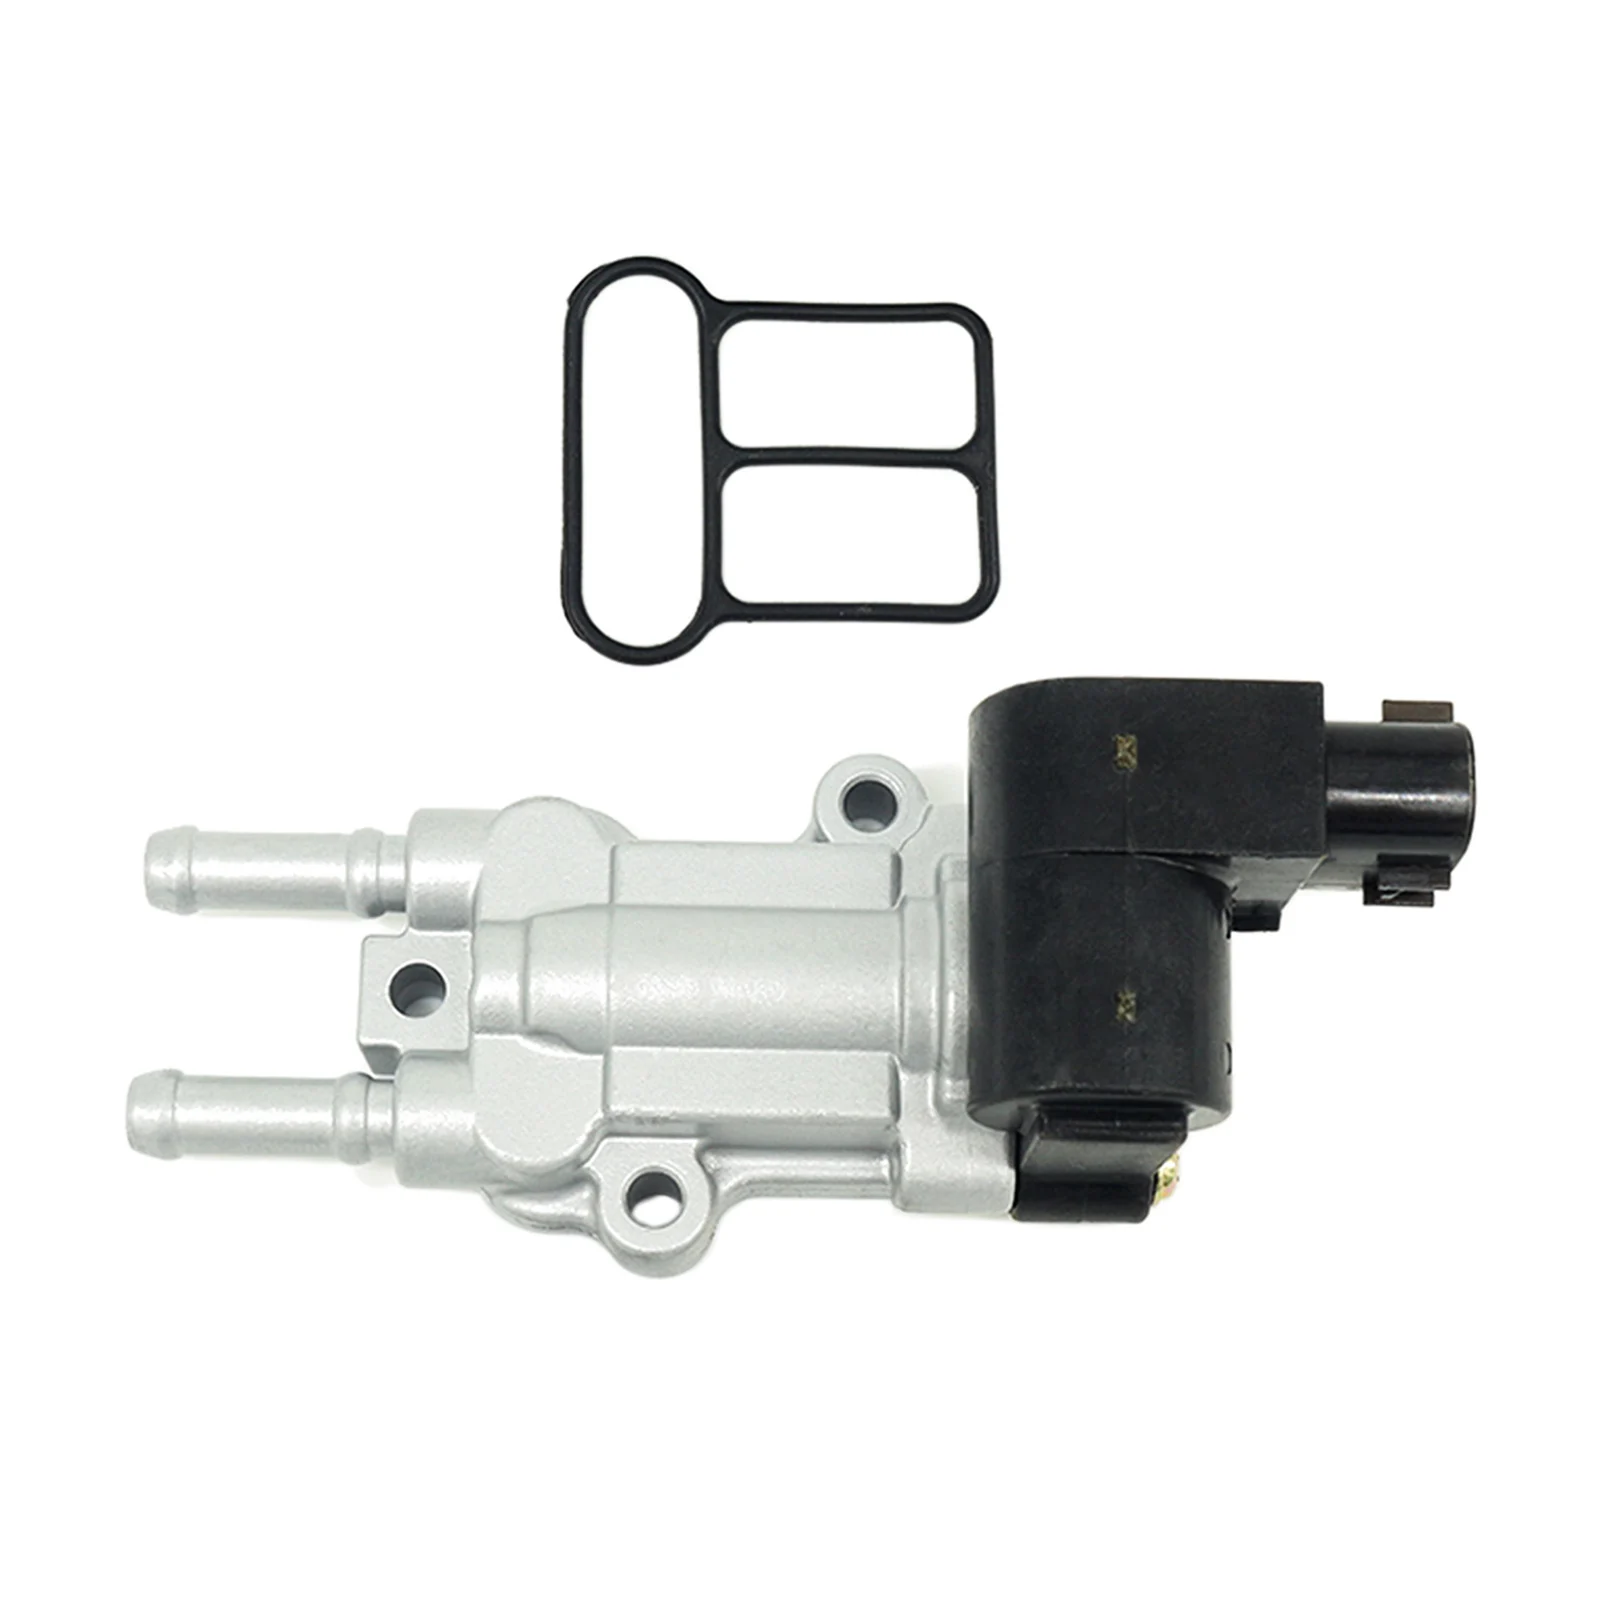 Idle Speed Control Value Car Replace Parts Spare Parts for  Corolla 2227021011 1.5L Car Replace Accessory